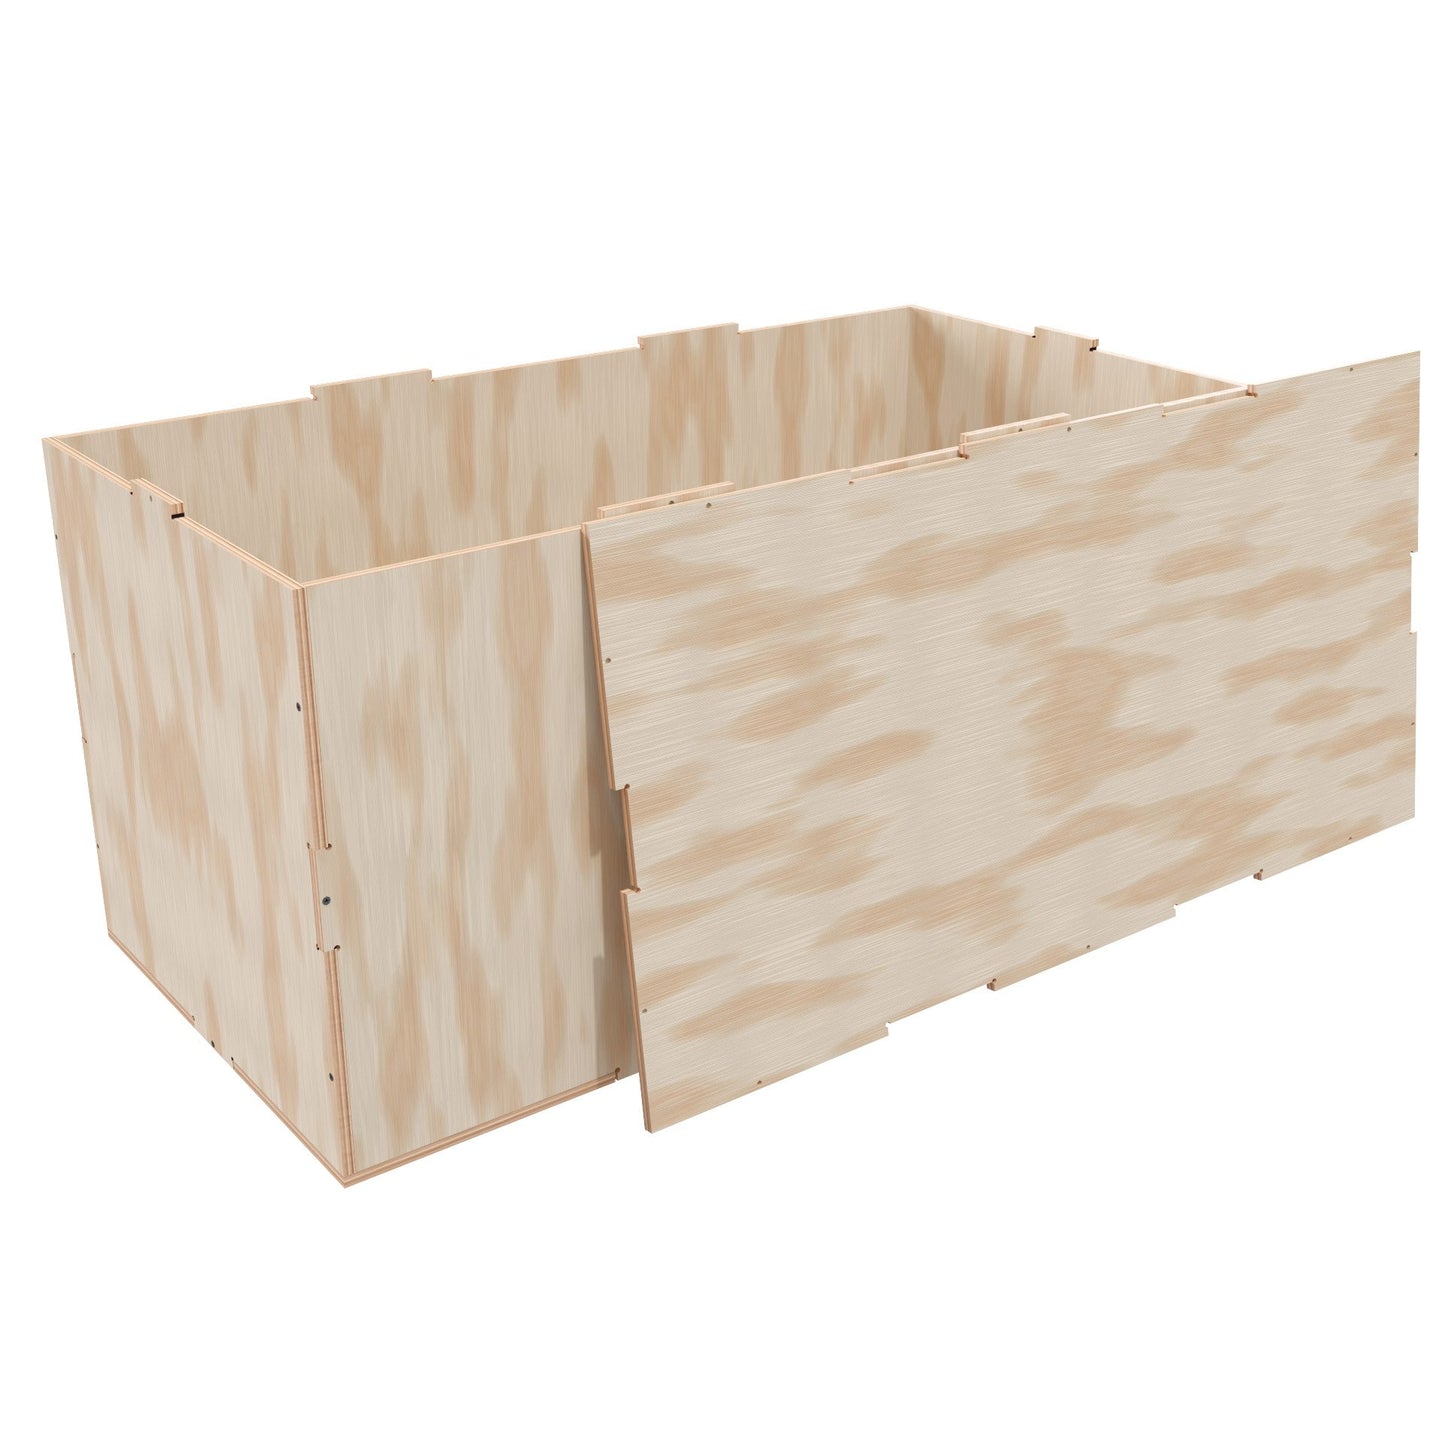 Plywood Shipping Crate 47x24x24